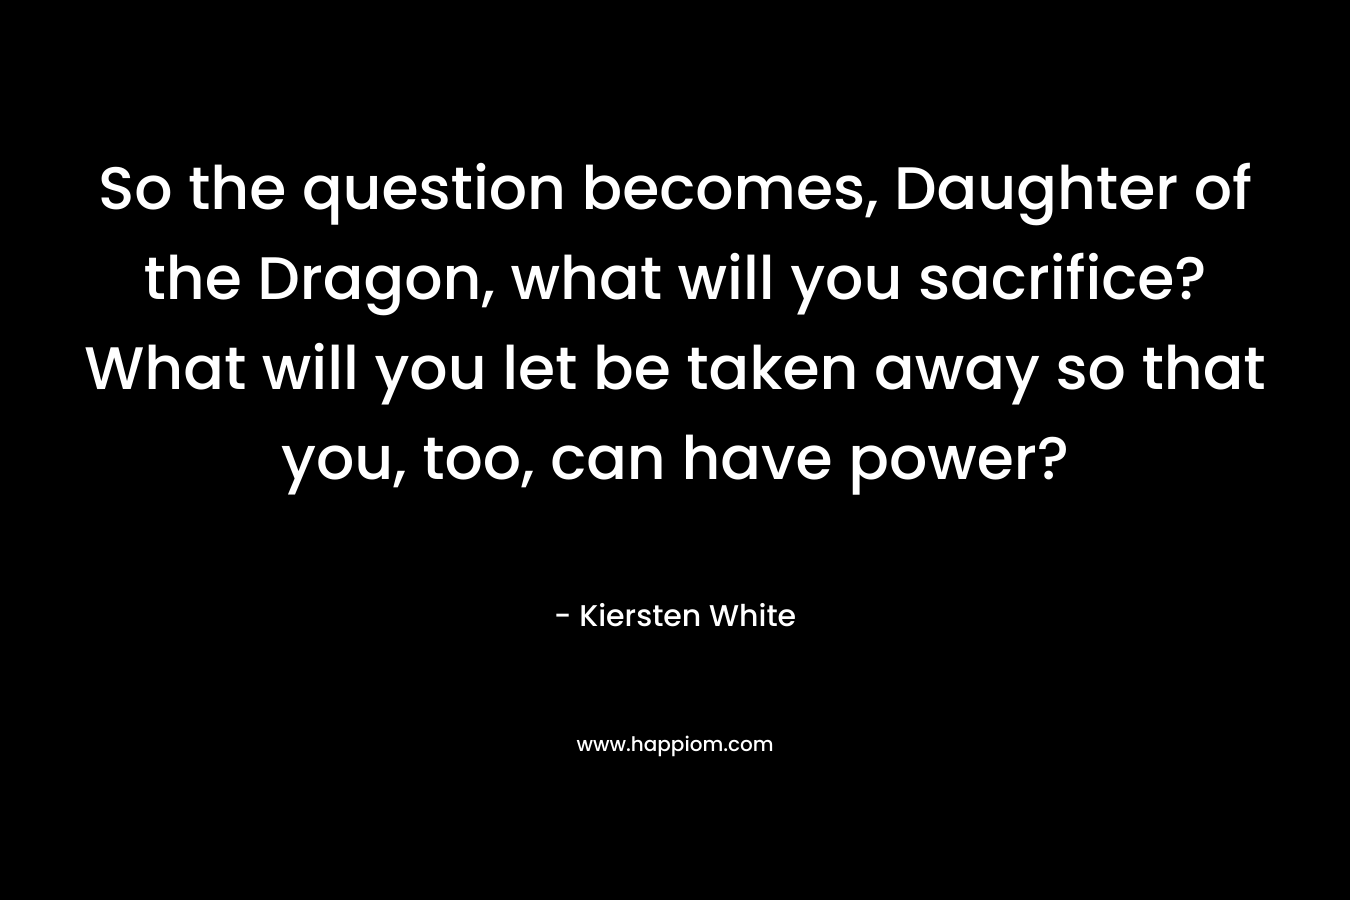 So the question becomes, Daughter of the Dragon, what will you sacrifice? What will you let be taken away so that you, too, can have power?